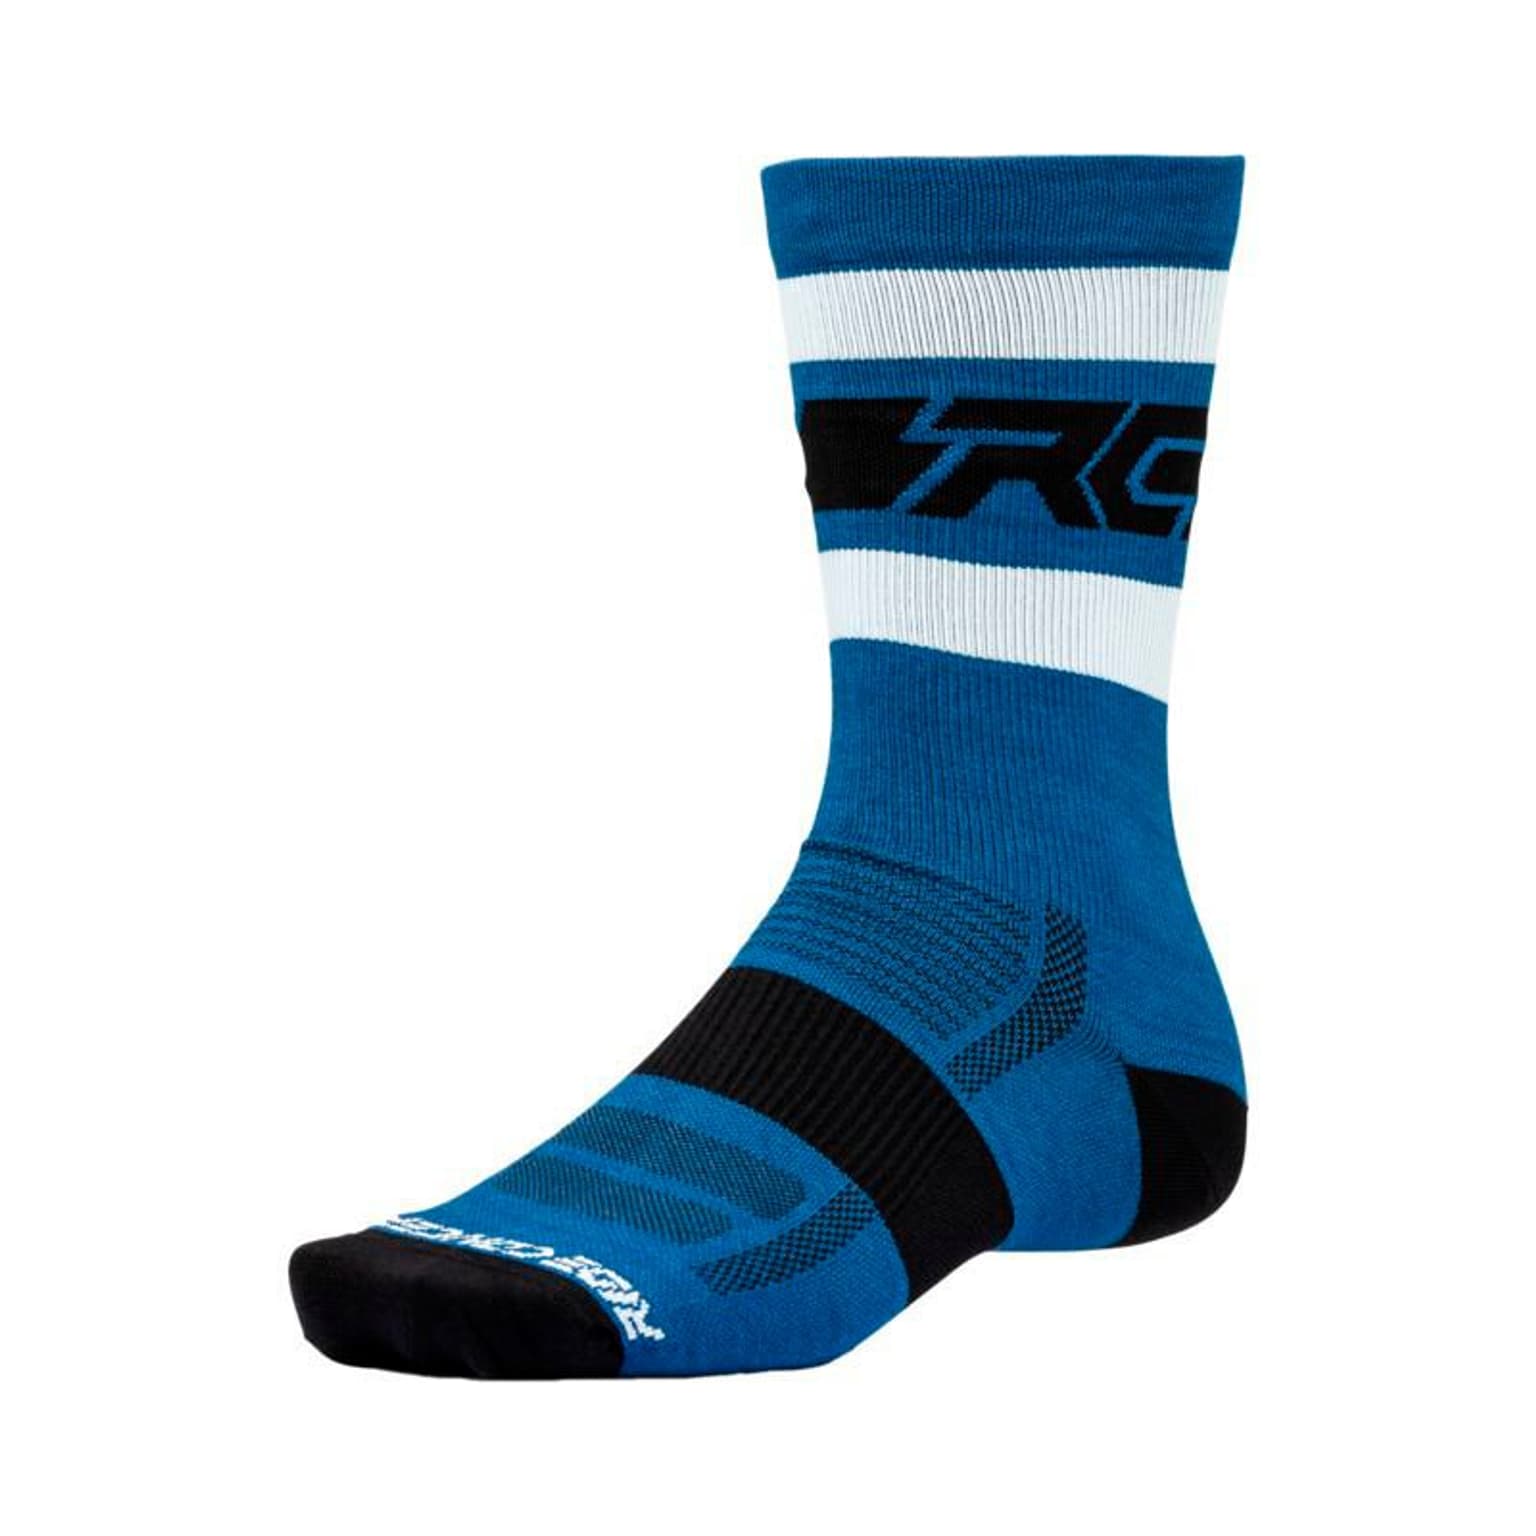 Ride Concepts Ride Concepts Woll Fifty-Fifty Velosocken blau 1